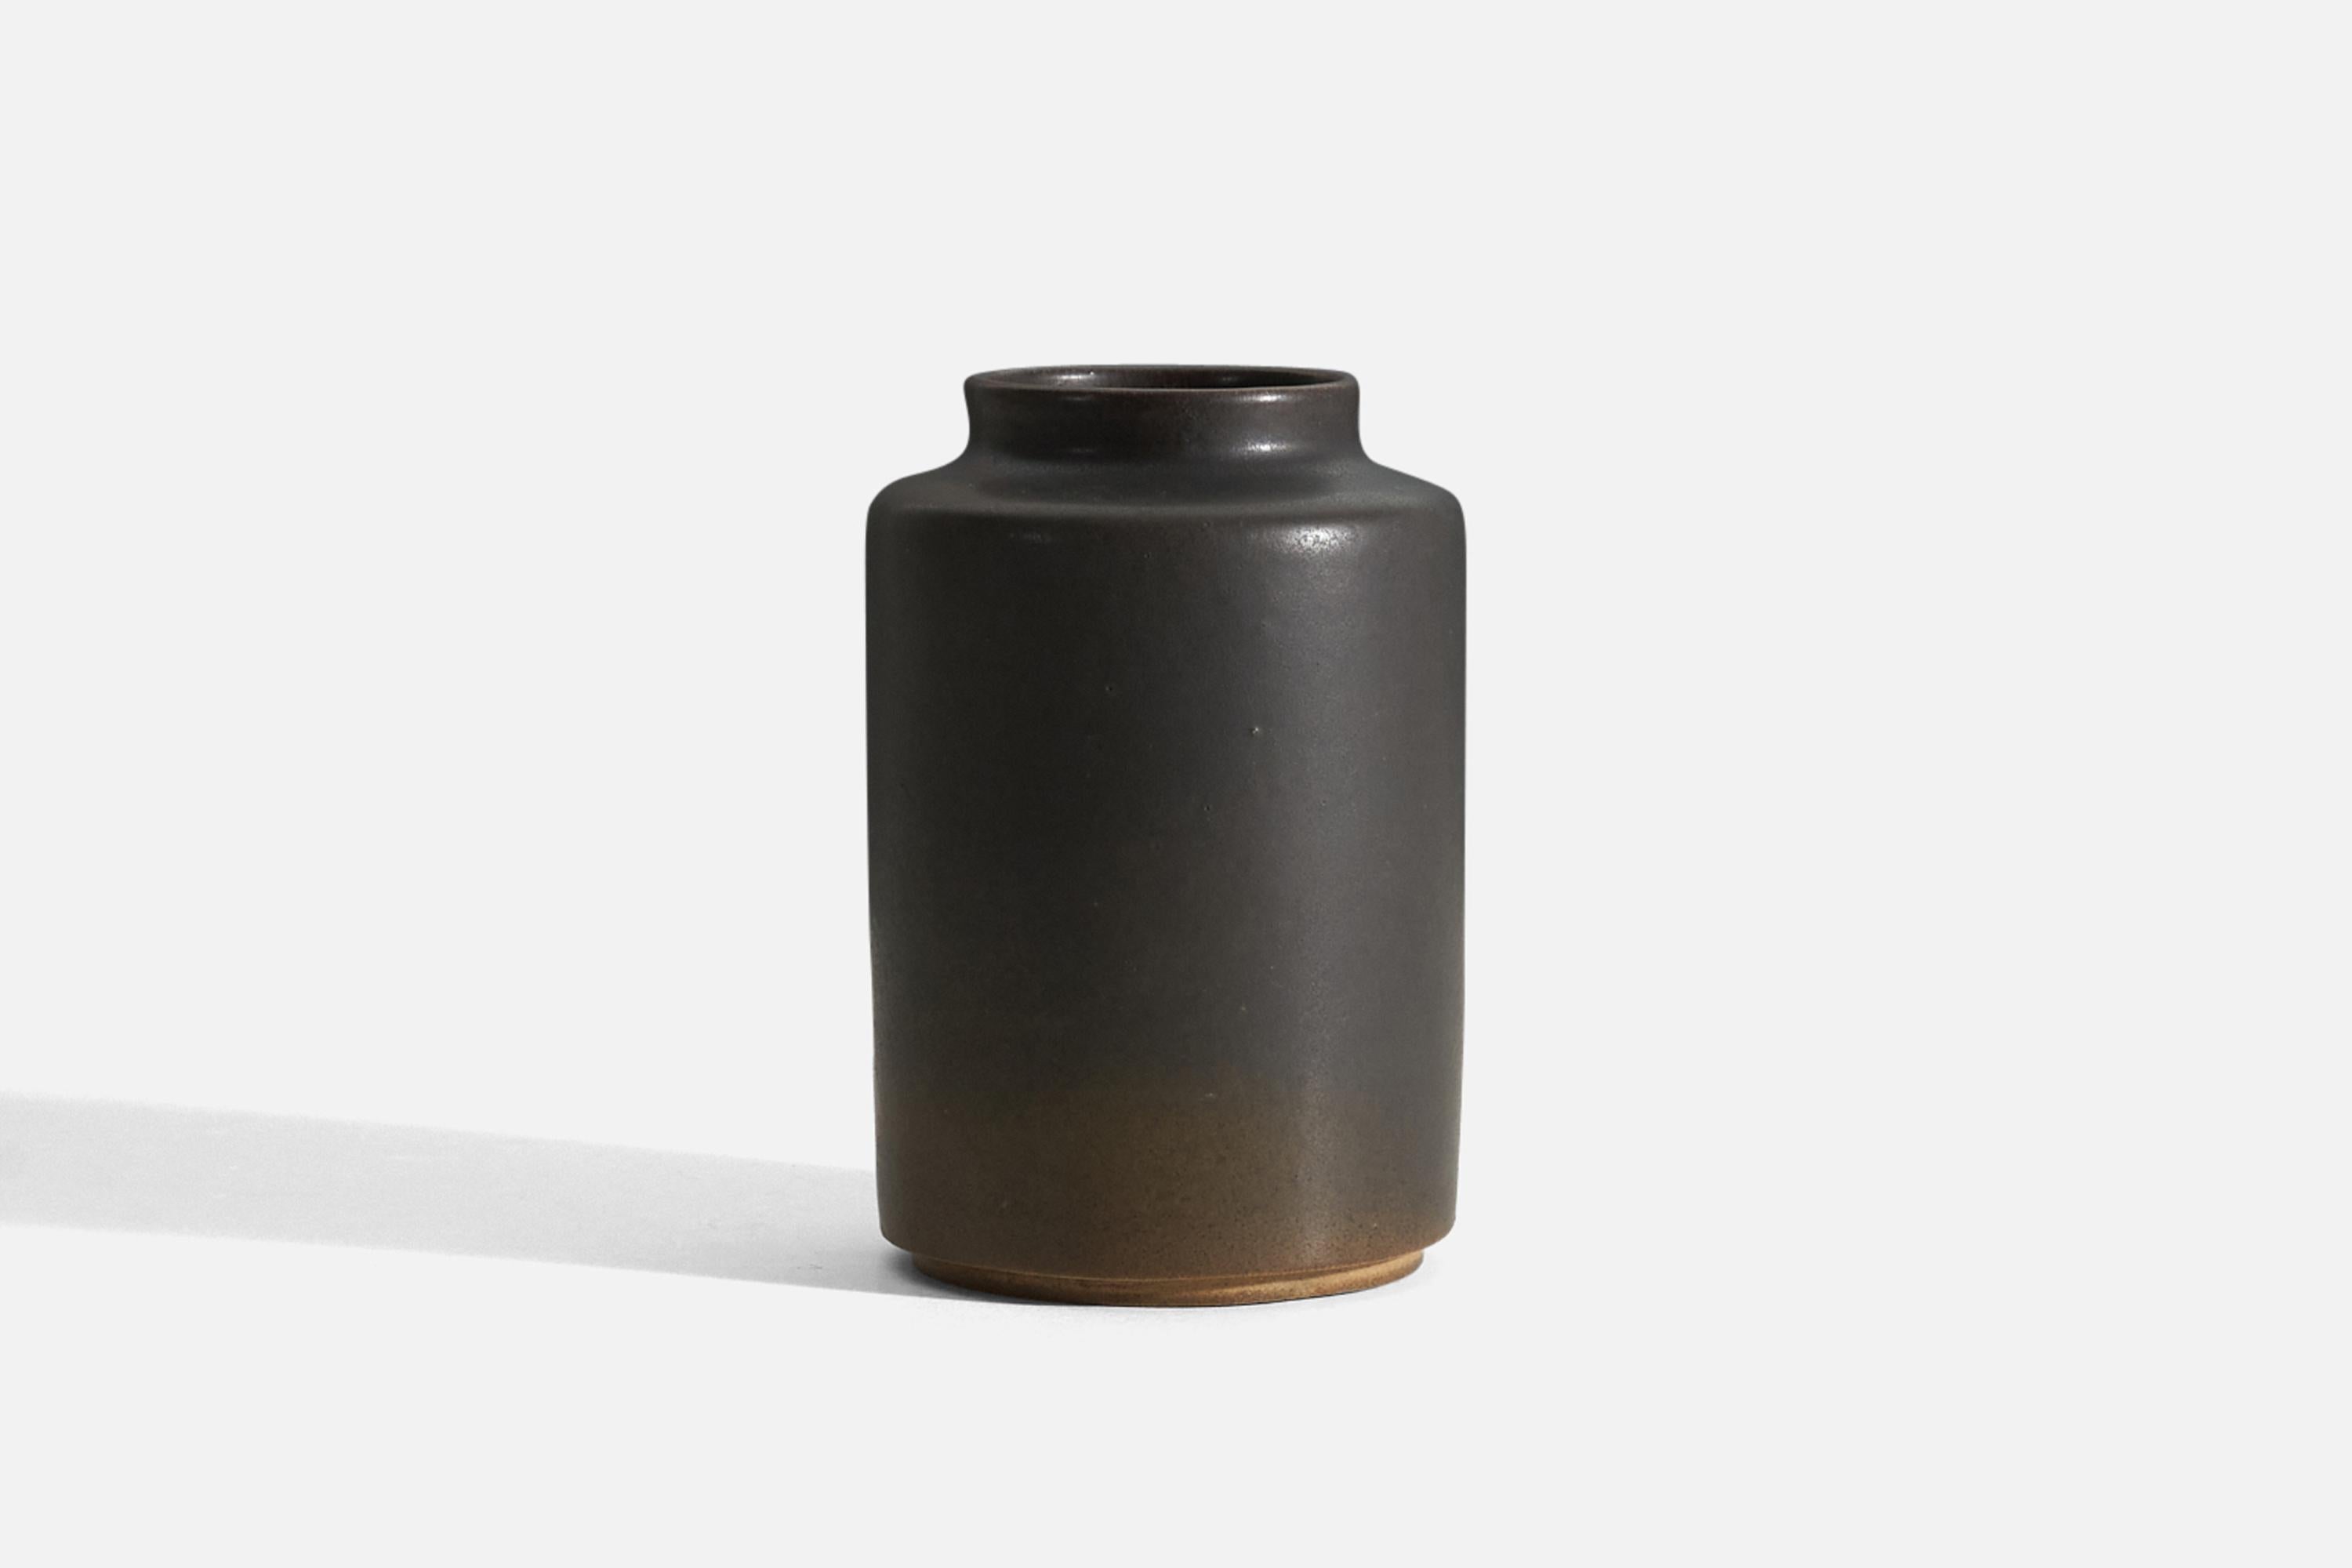 A gray and brown glazed stoneware vase designed and produced by Åke Holm, c. 1960s.